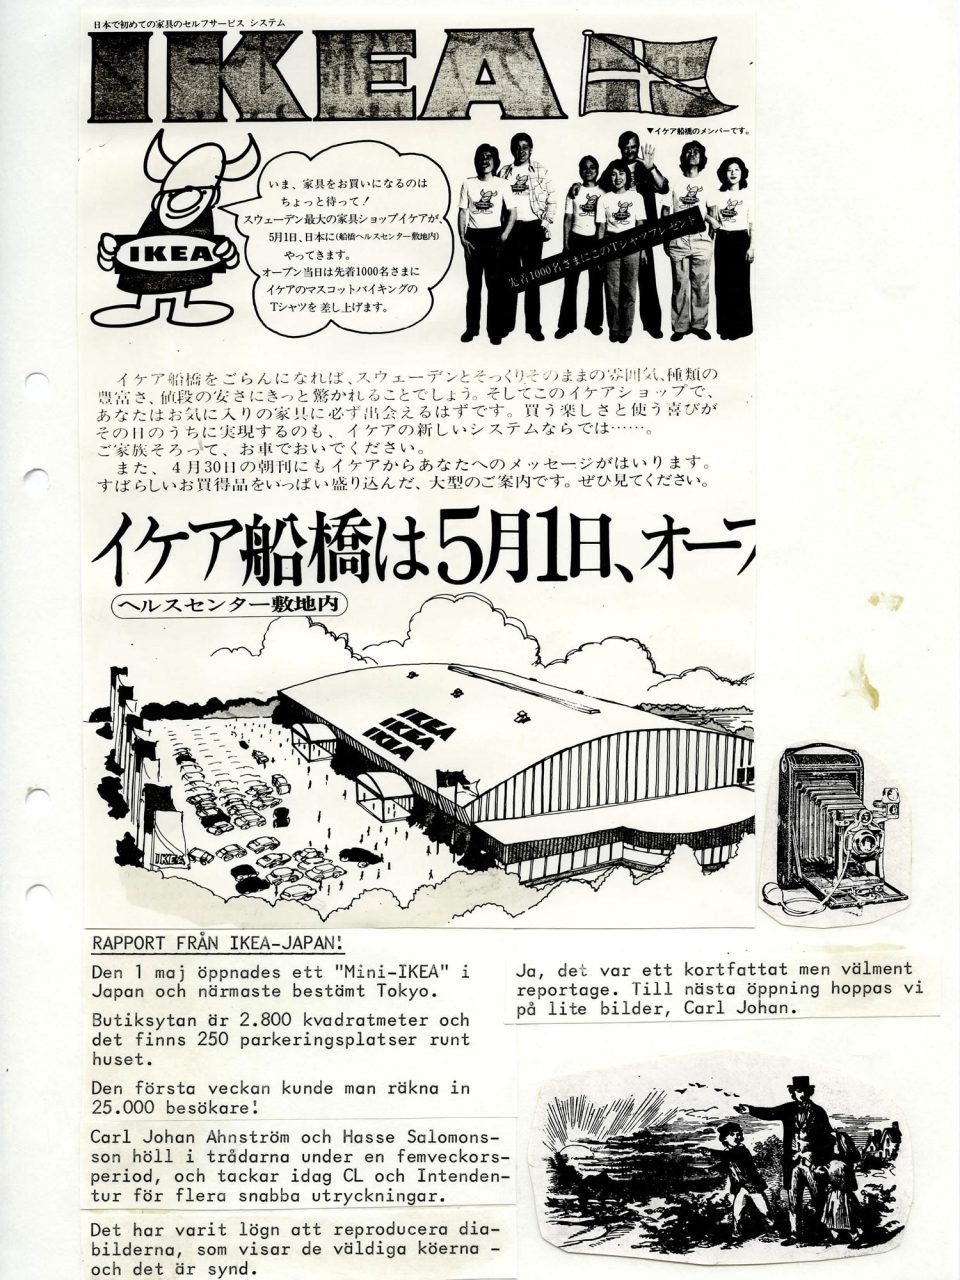 Page from 1970s cut and paste magazine with high-contrast black and white images and Japanese text.